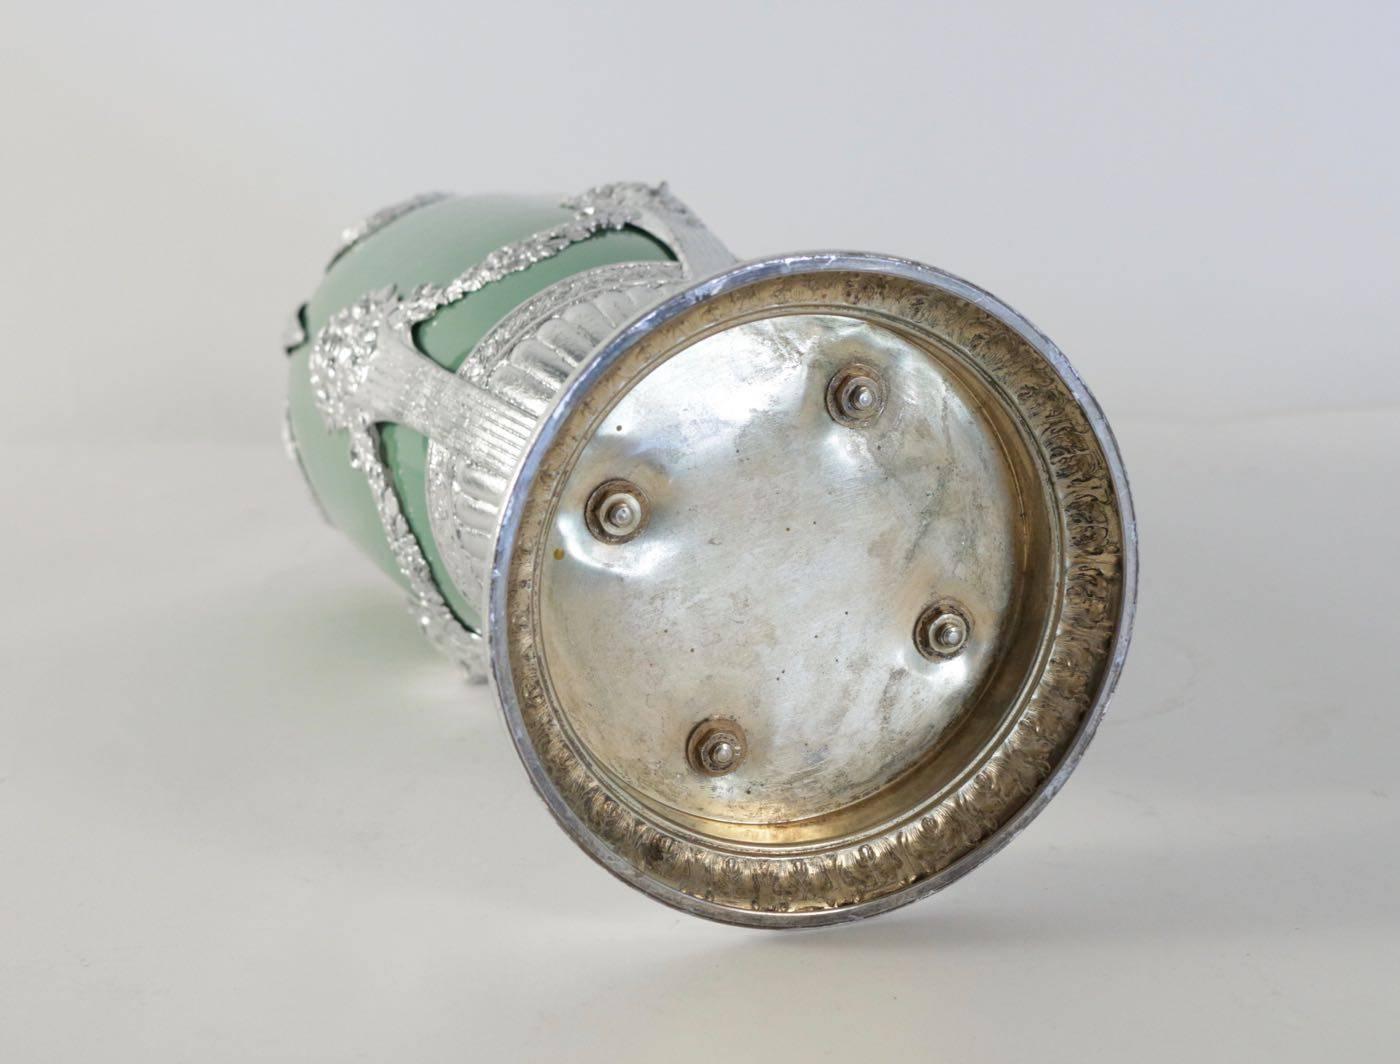 Metal Celadon Vase in Faience, Silver Plate and Silver Leaf, 19th Century Period For Sale